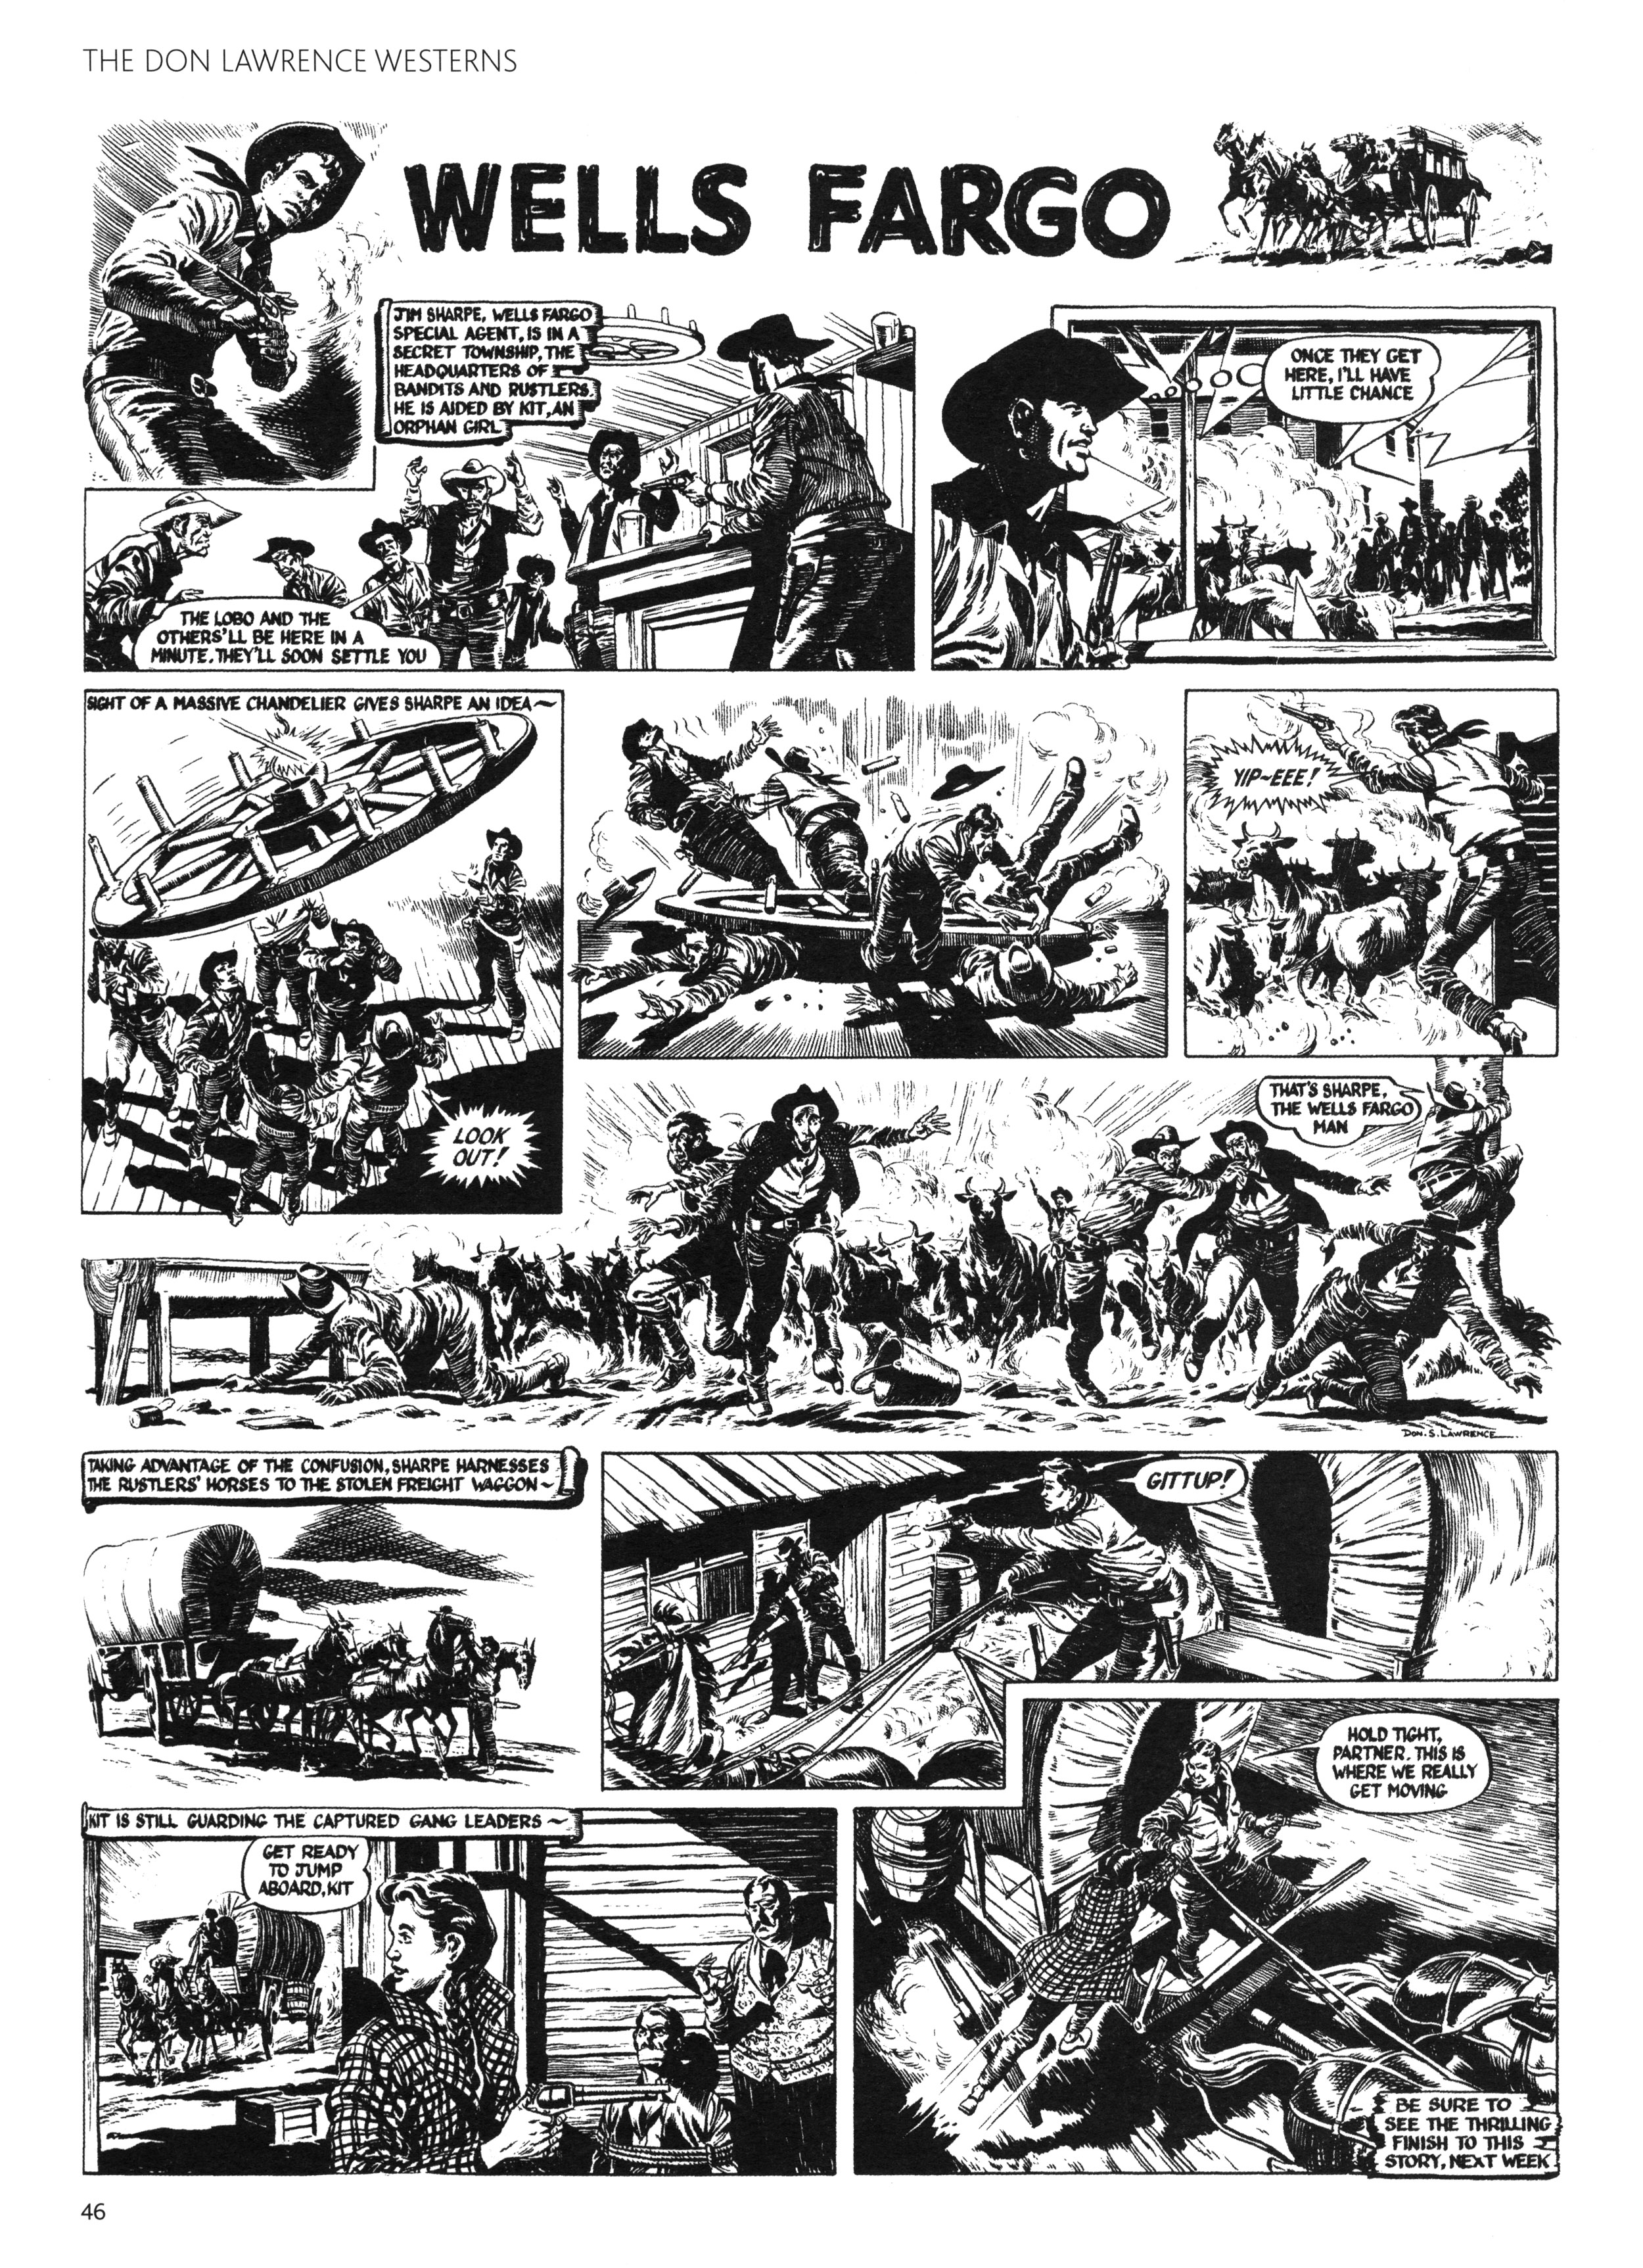 Read online Don Lawrence Westerns comic -  Issue # TPB (Part 1) - 50